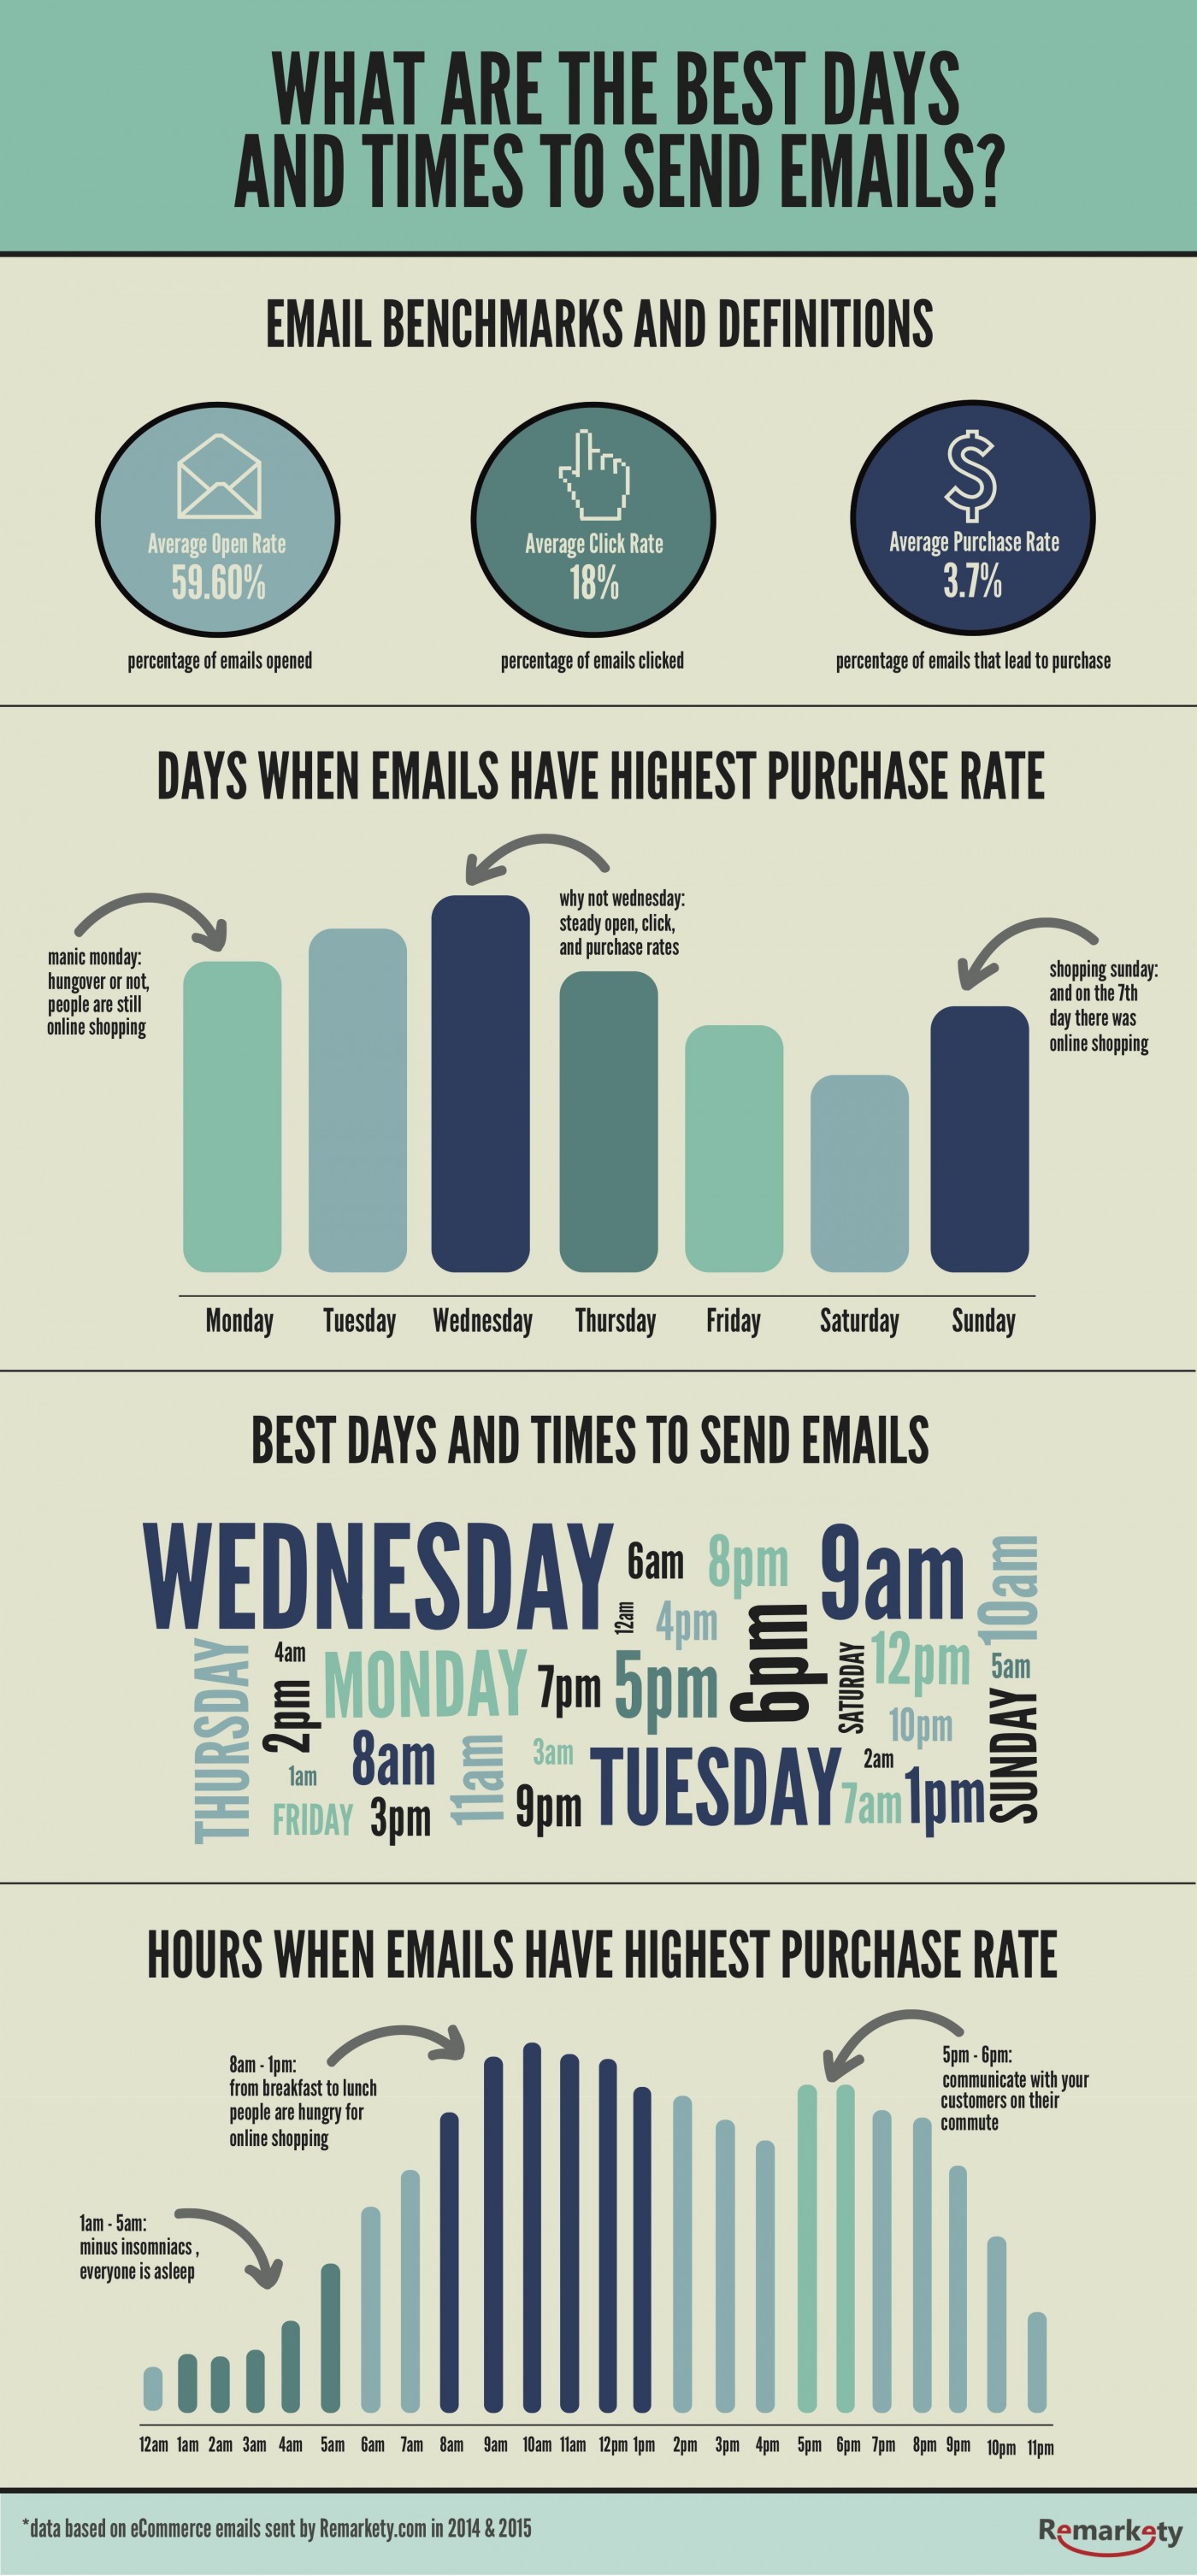 Online Shopping Trends Reveal Best Days And Times To Email Customers